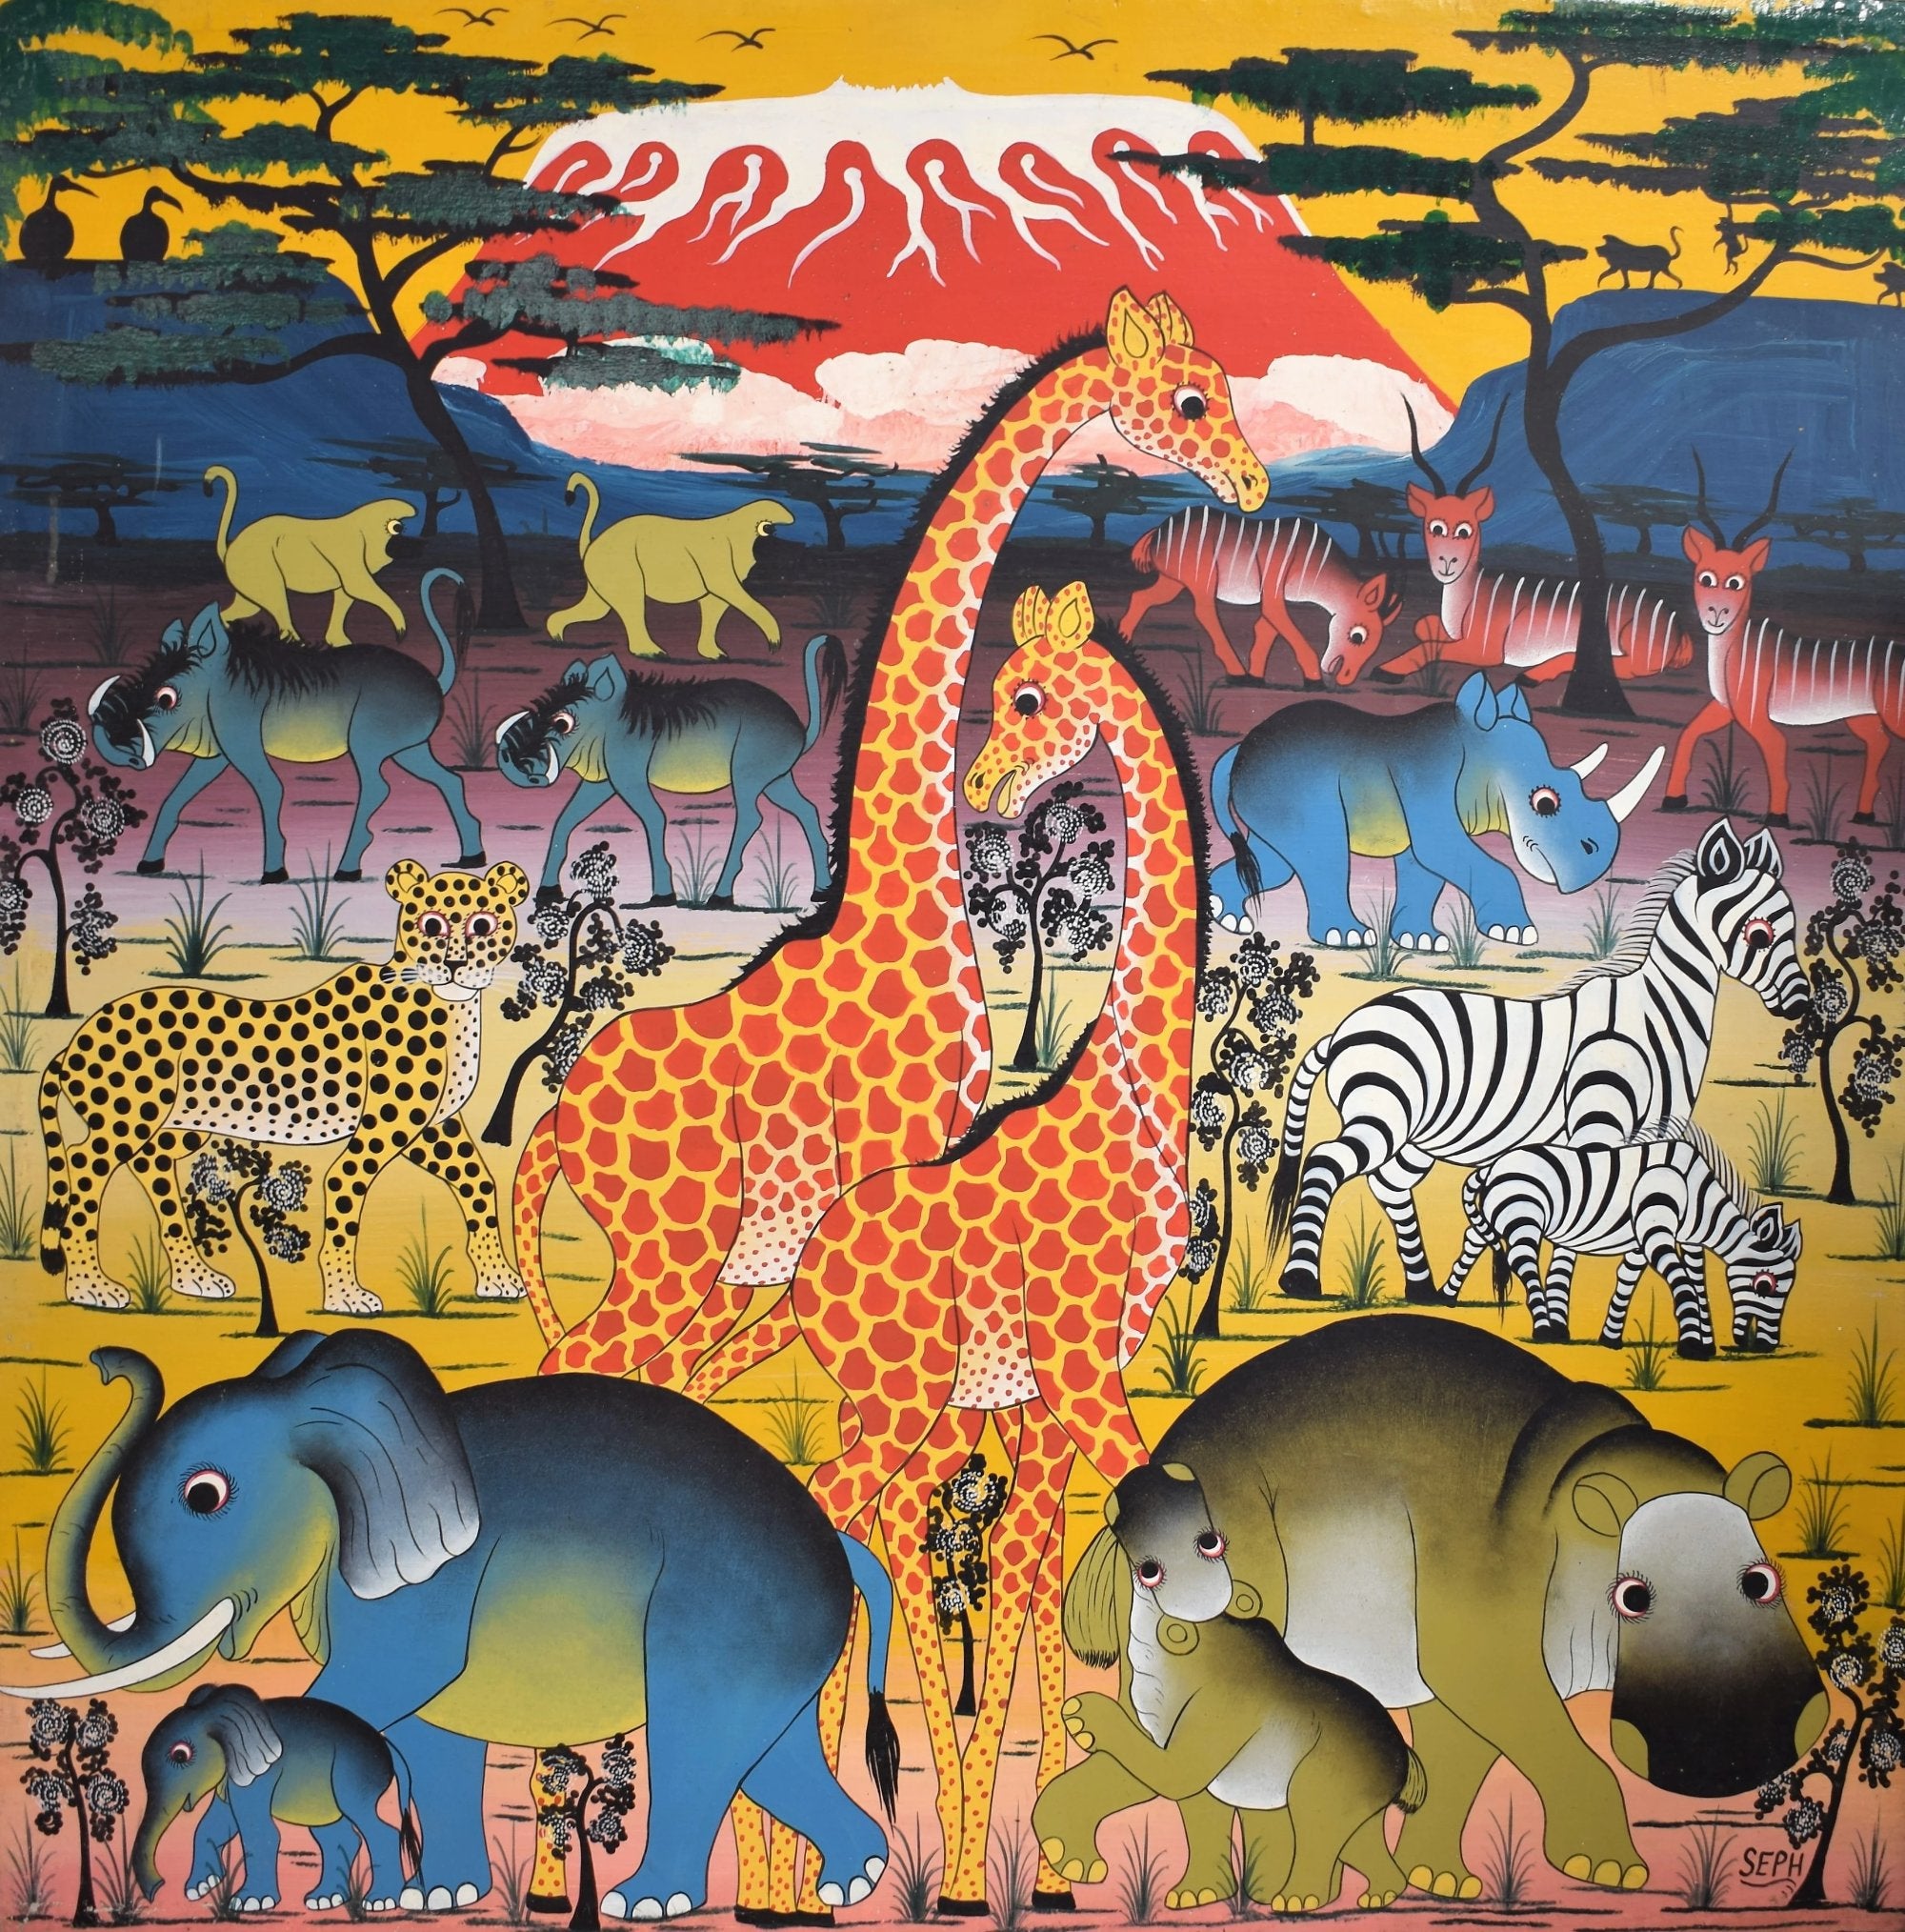 African art of animals inside national park for sale